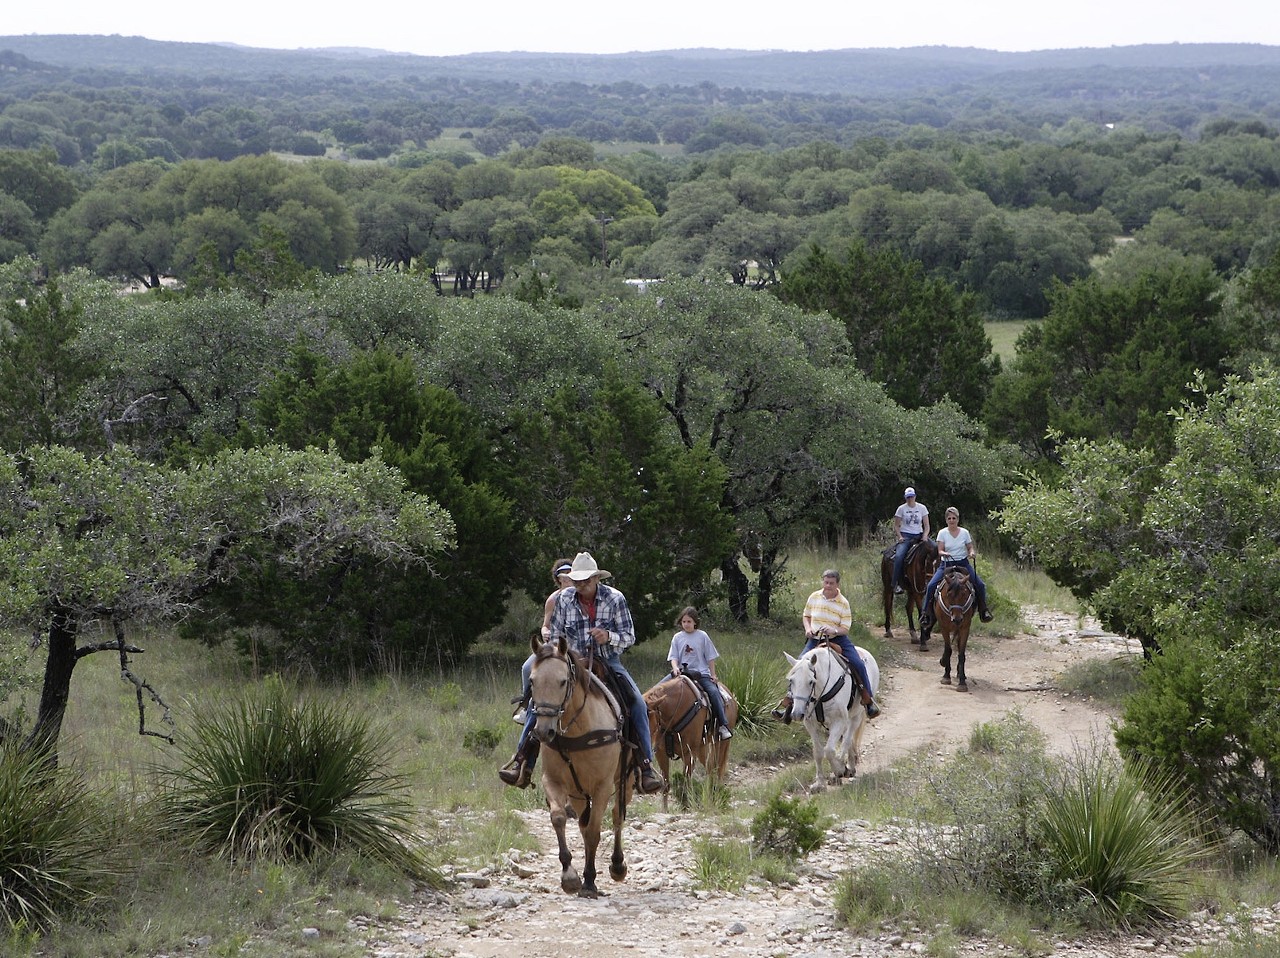 Hill Country State Natural Area
10600 Bandera Creek Road, Bandera, (830) 796-4413, tpwd.texas.gov
Hill Country State Natural Area's rugged terrain is perfect for those looking to rough it. It offers primitive camping — as in without plumbing — as well as horseback trails. The 5,000-acre area has beautiful landscape, including grasslands, canyons and seasonal springs.